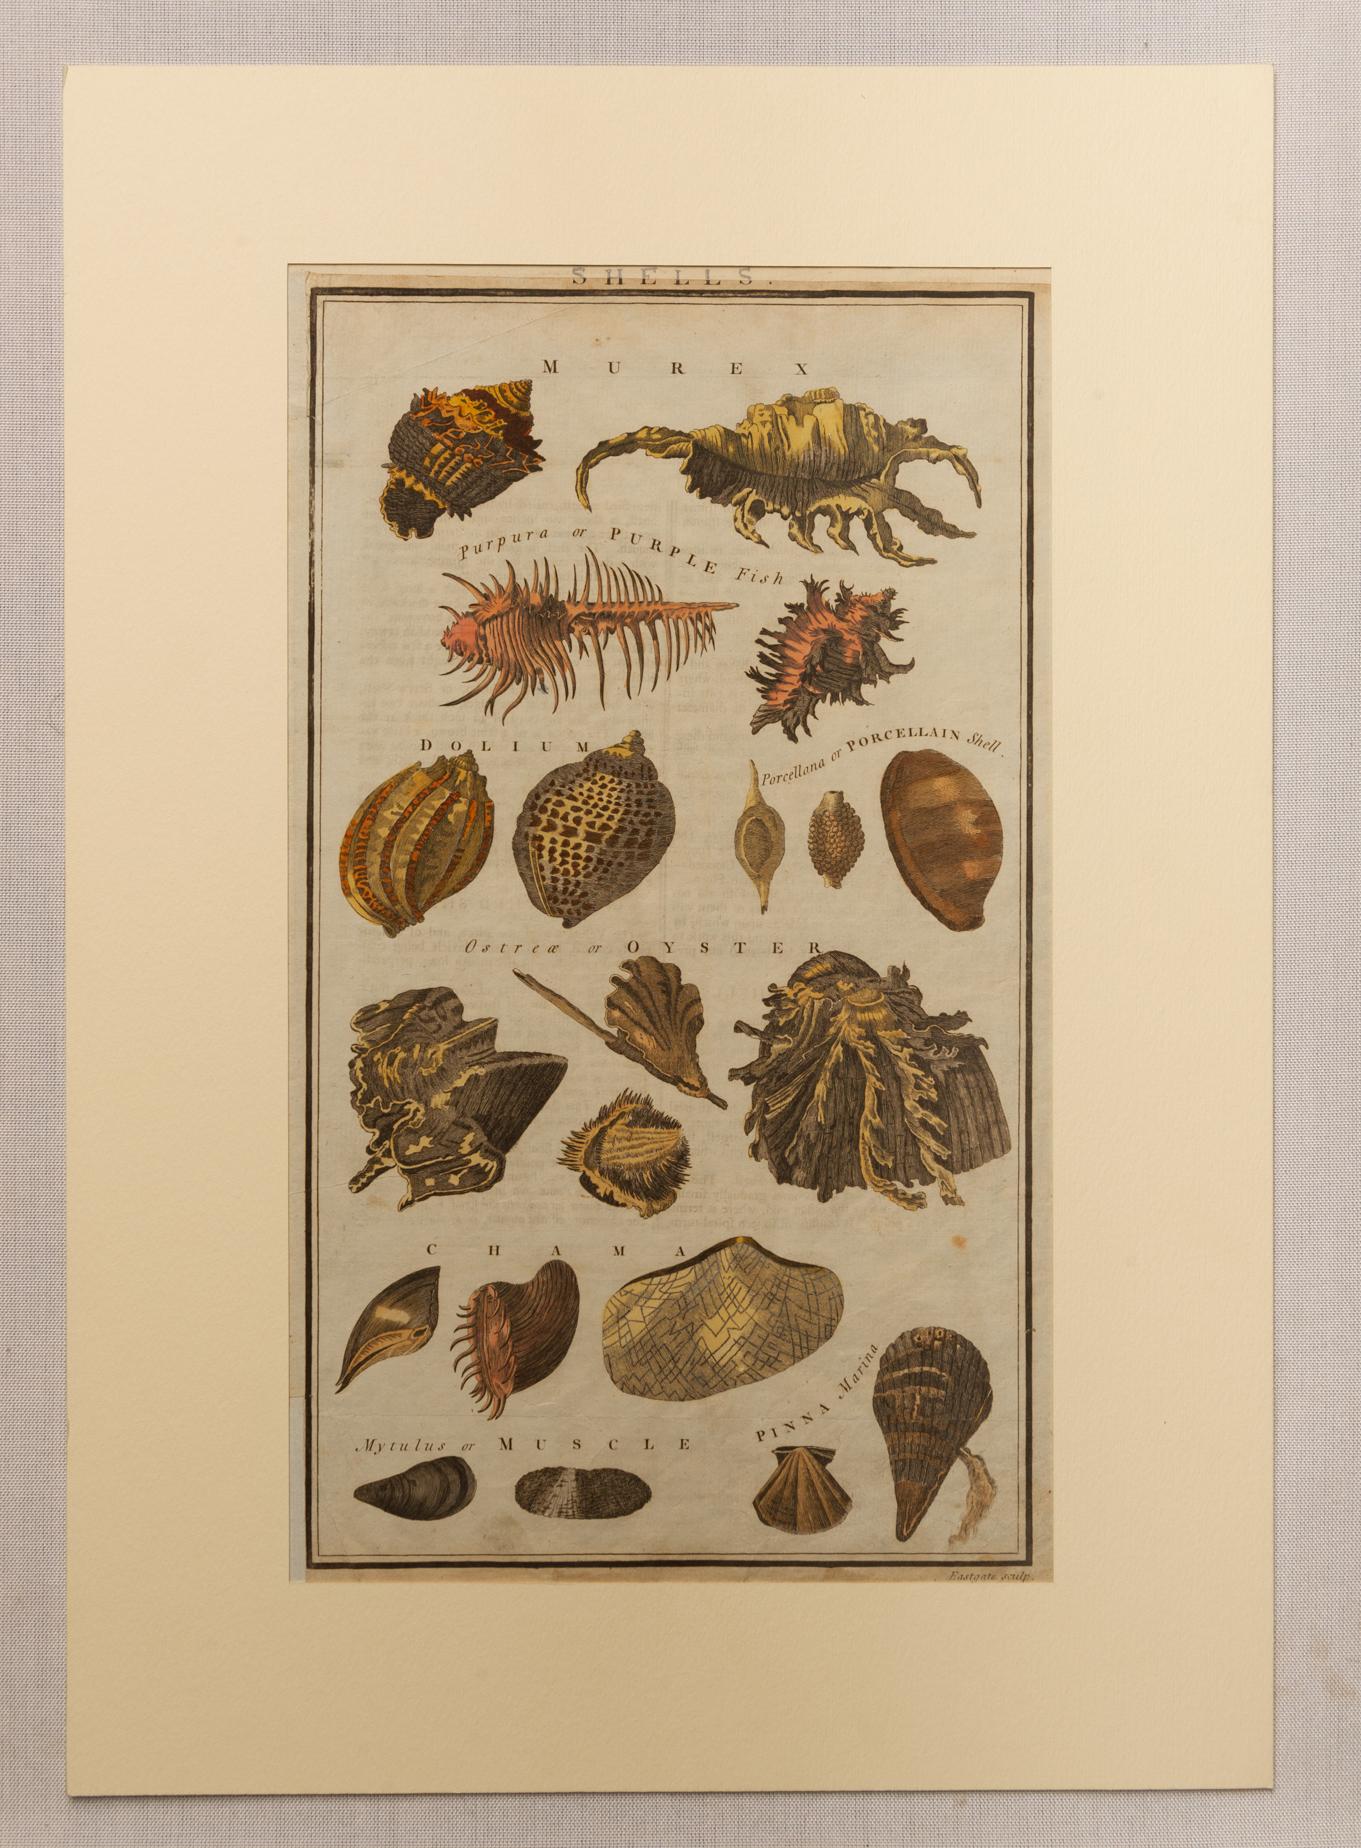 ST/487- 1-2-3/ ST486-5. - Series of rare English etchings of Shell Fish, Shells and Crostaceous Animals.  Hand watercolored.
by: Alex.r Hogg at the Kings Arms n° 16 Paternoster Row. London - Eastgate sculp.
Sizes: cm. 38x 24 (only sheet), but cm.